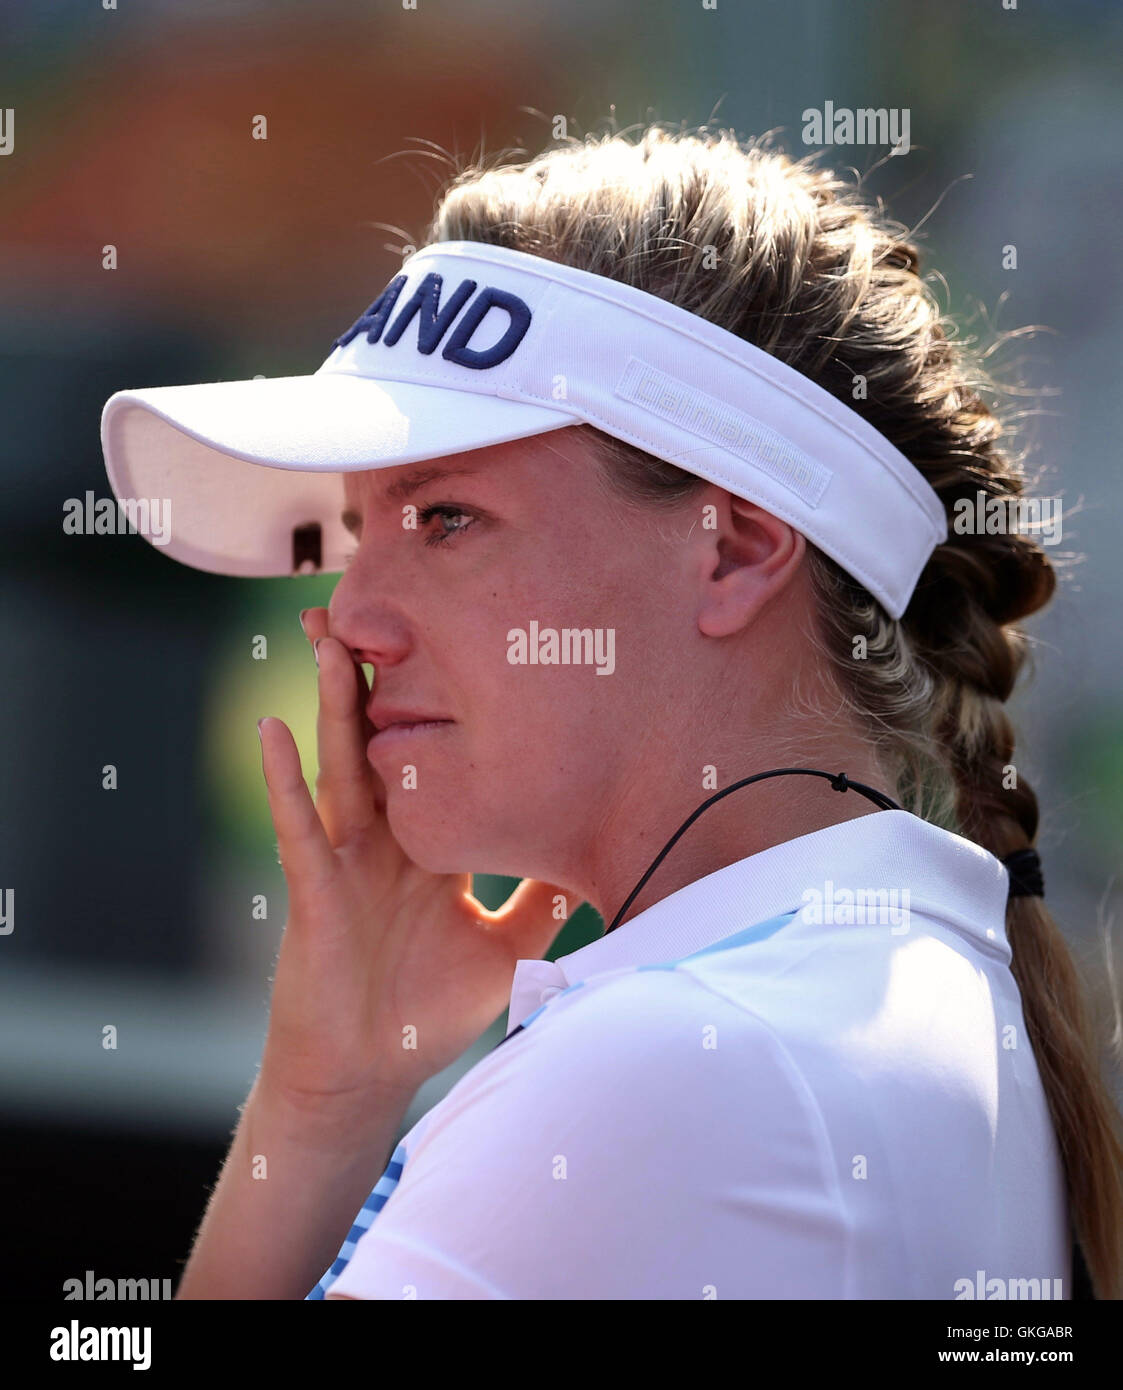 Rio de Janeiro, Brazil. 18th Aug, 2016. NOORA TAMMINEN of Finland competes in Women's Individual Stroke Play Round 3 during Golf competition at the Rio 2016 Summer Olympic Games. © Jon Gaede/ZUMA Wire/Alamy Live News Stock Photo